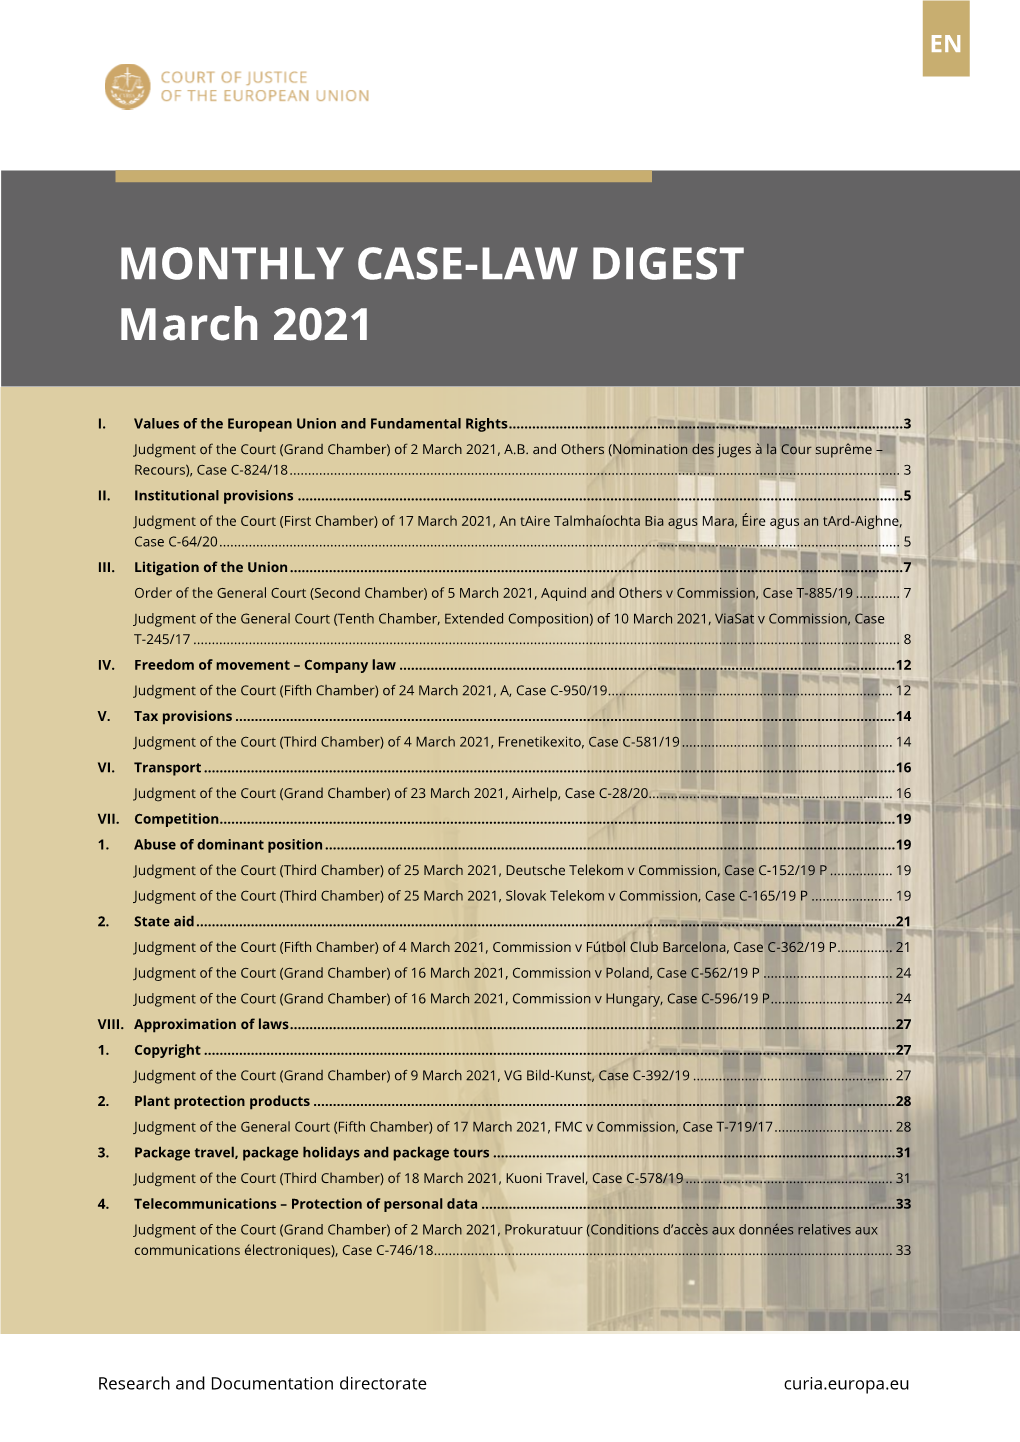 MONTHLY CASE-LAW DIGEST M Arch 2021